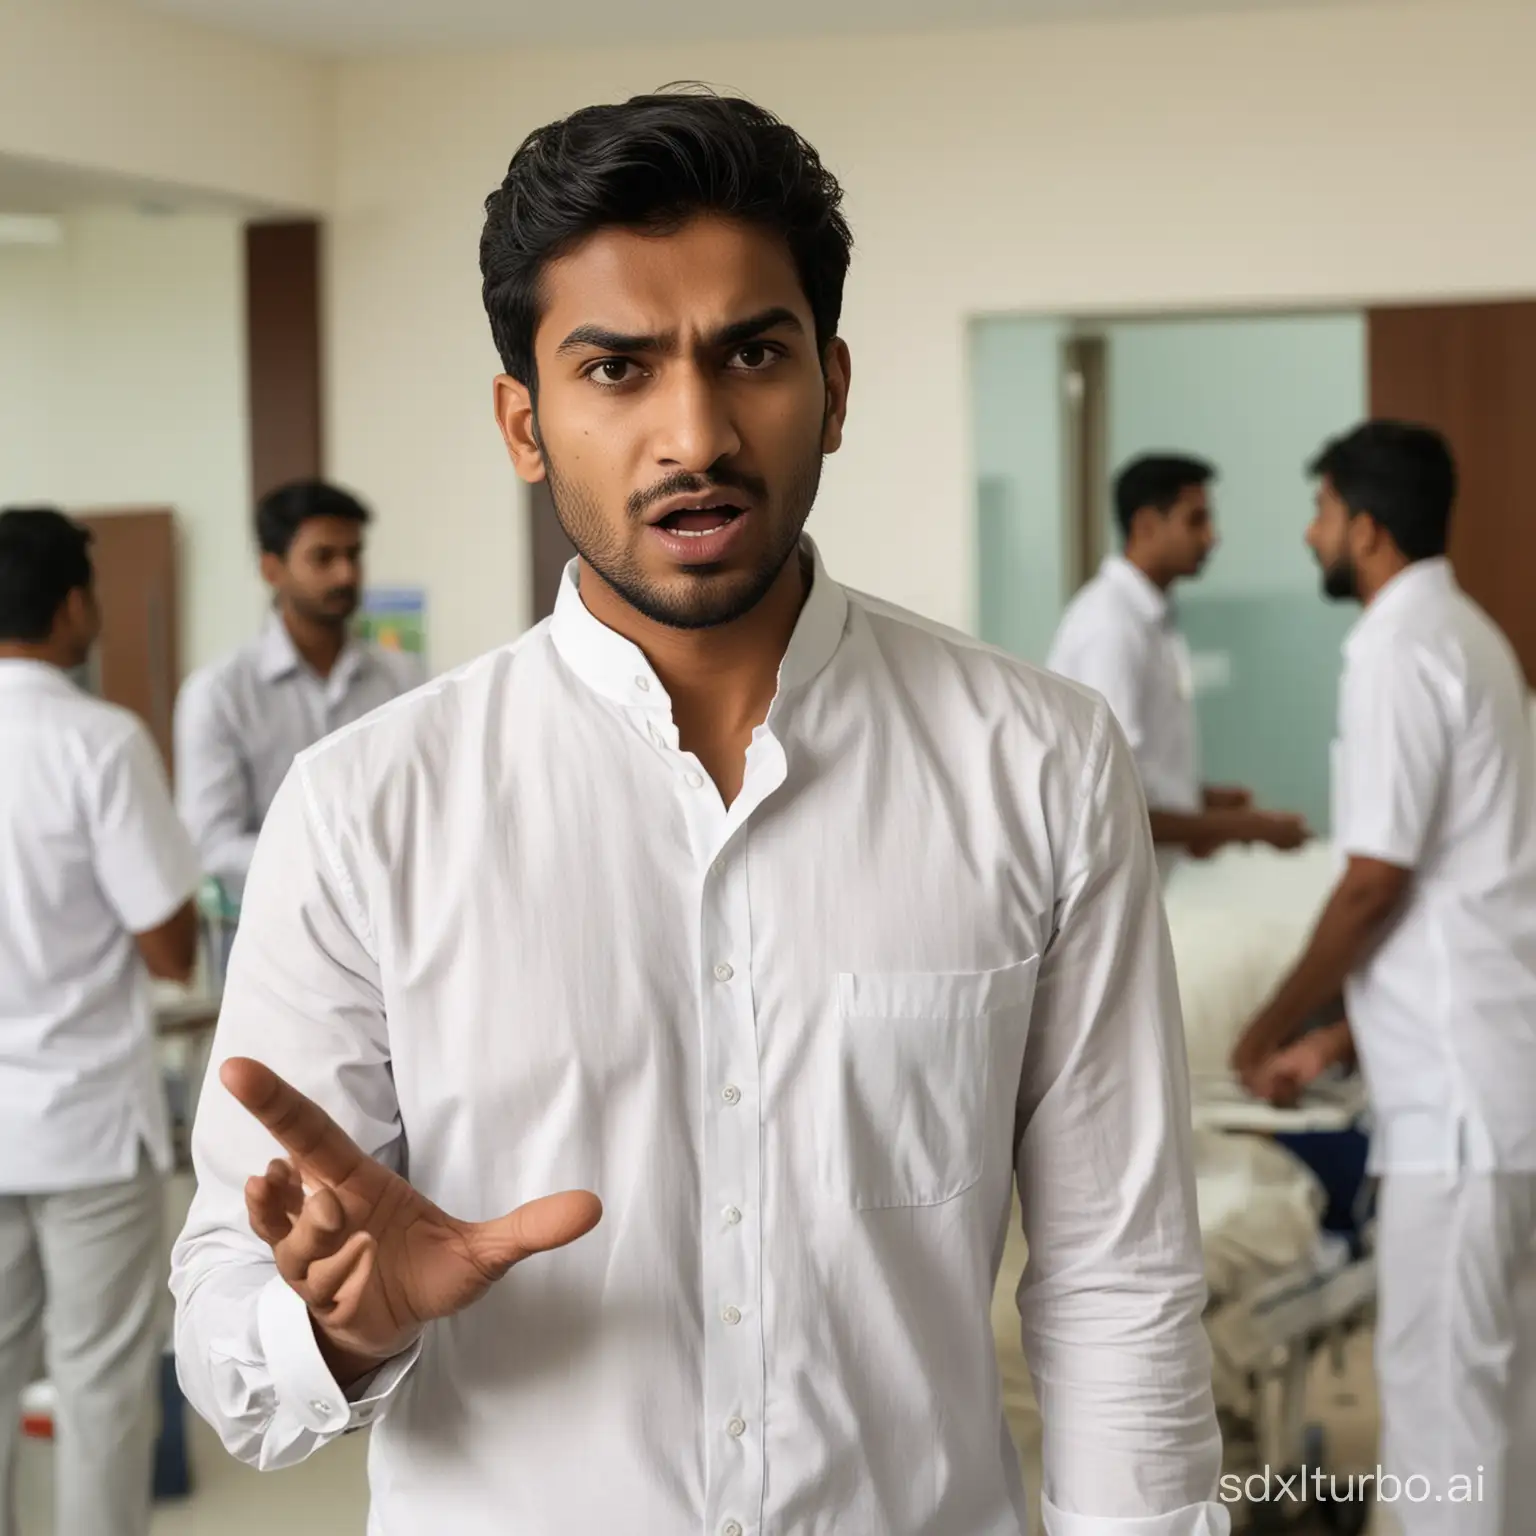 Young Indian middle class man, wearing white shirt, angry, talking, in Hospital reception